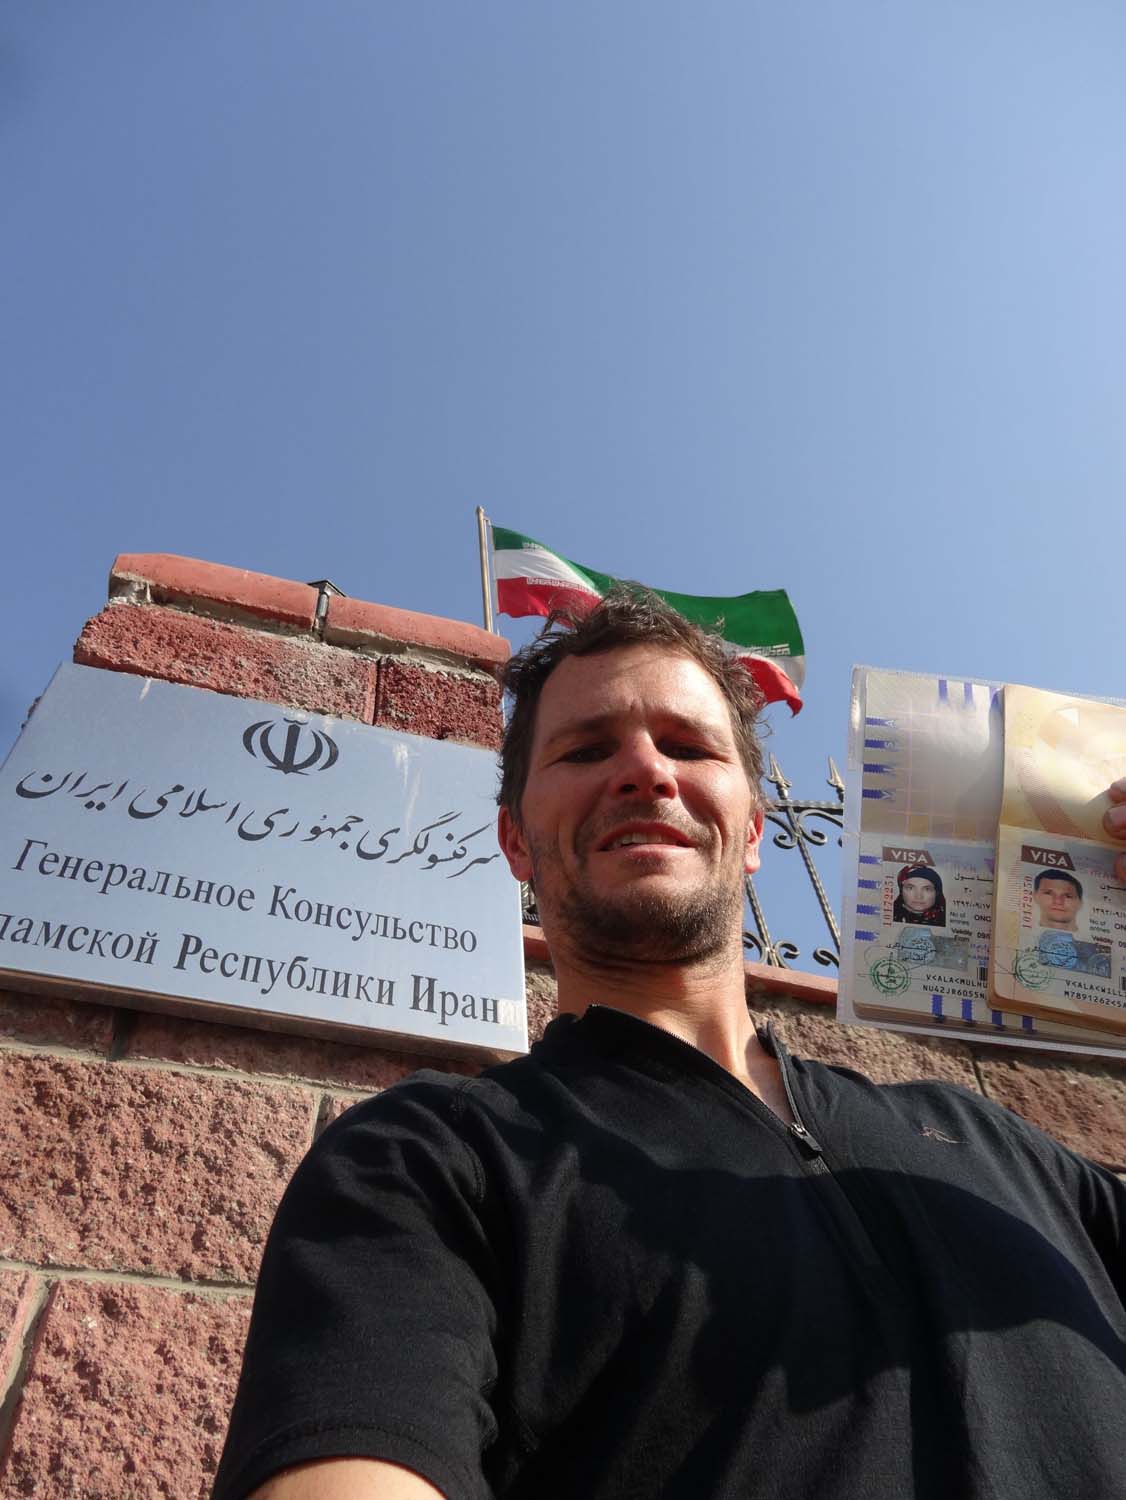 we were given 30 day visas for Iran - woohoooo! (check out Jude's photo on the visa)